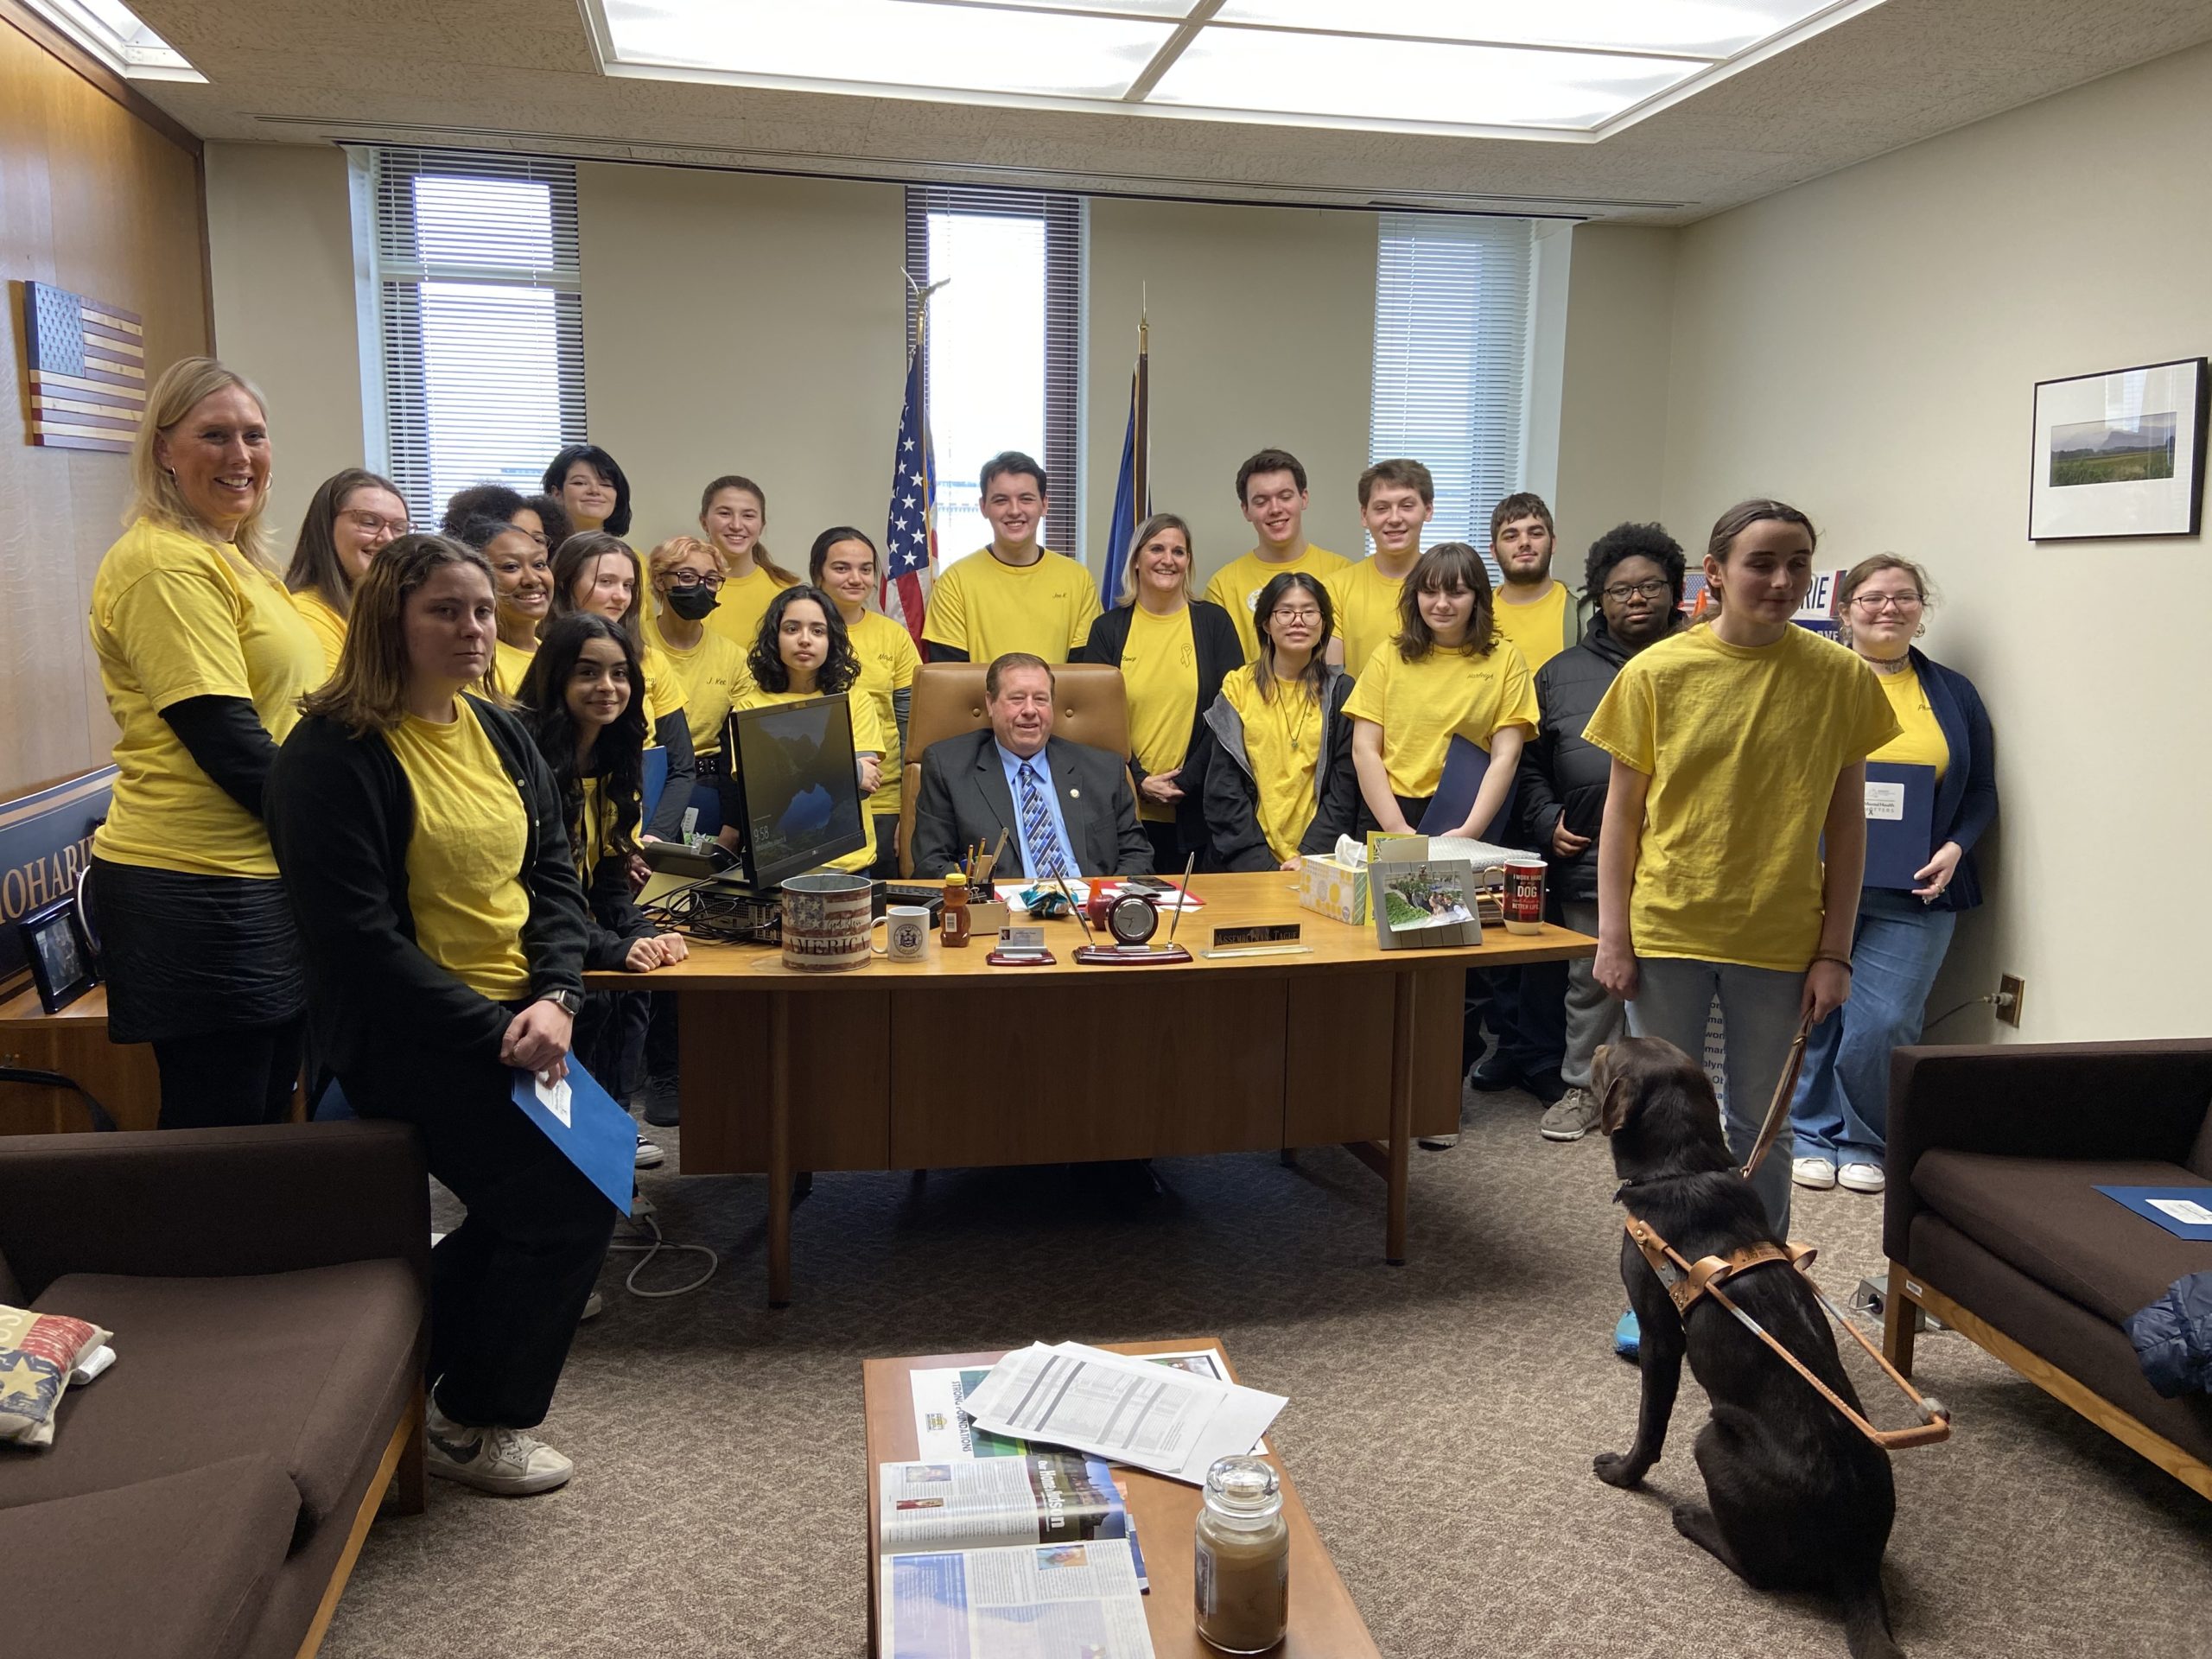 students in yellow shirts pose with assemblyman Chris Tague